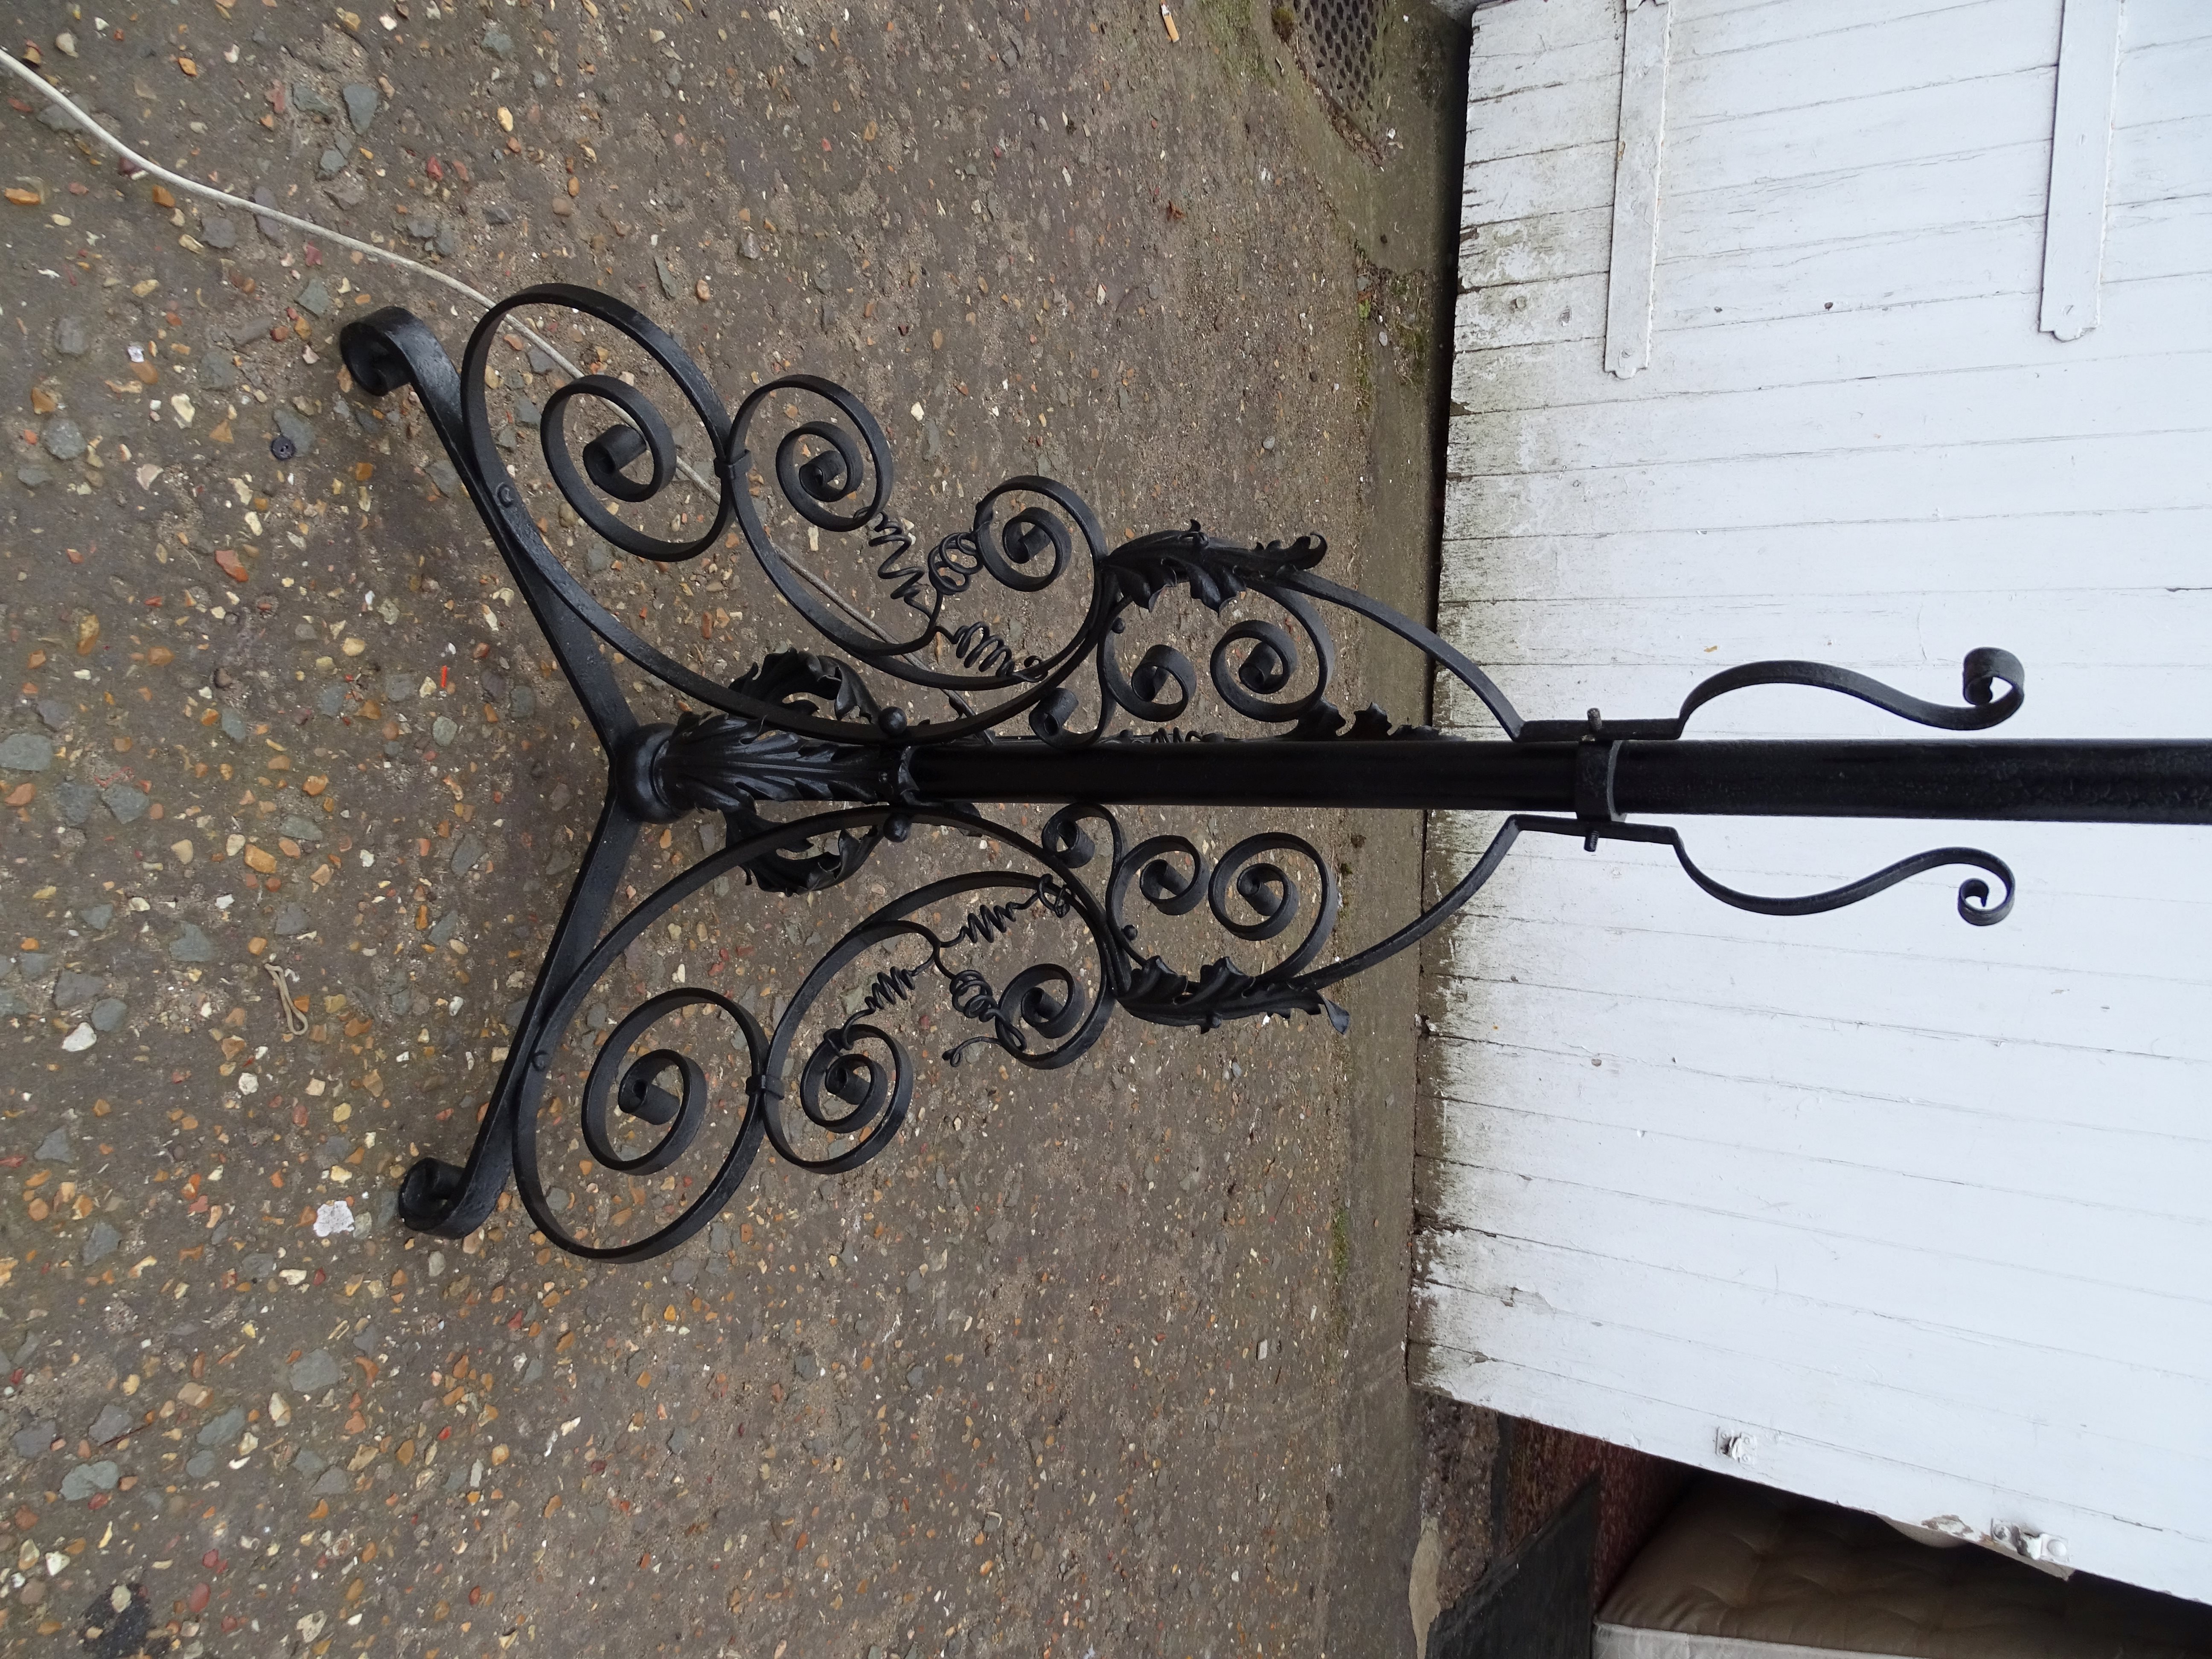 Ornate wrought iron floor standing oil lamp converted to electric - Image 2 of 2